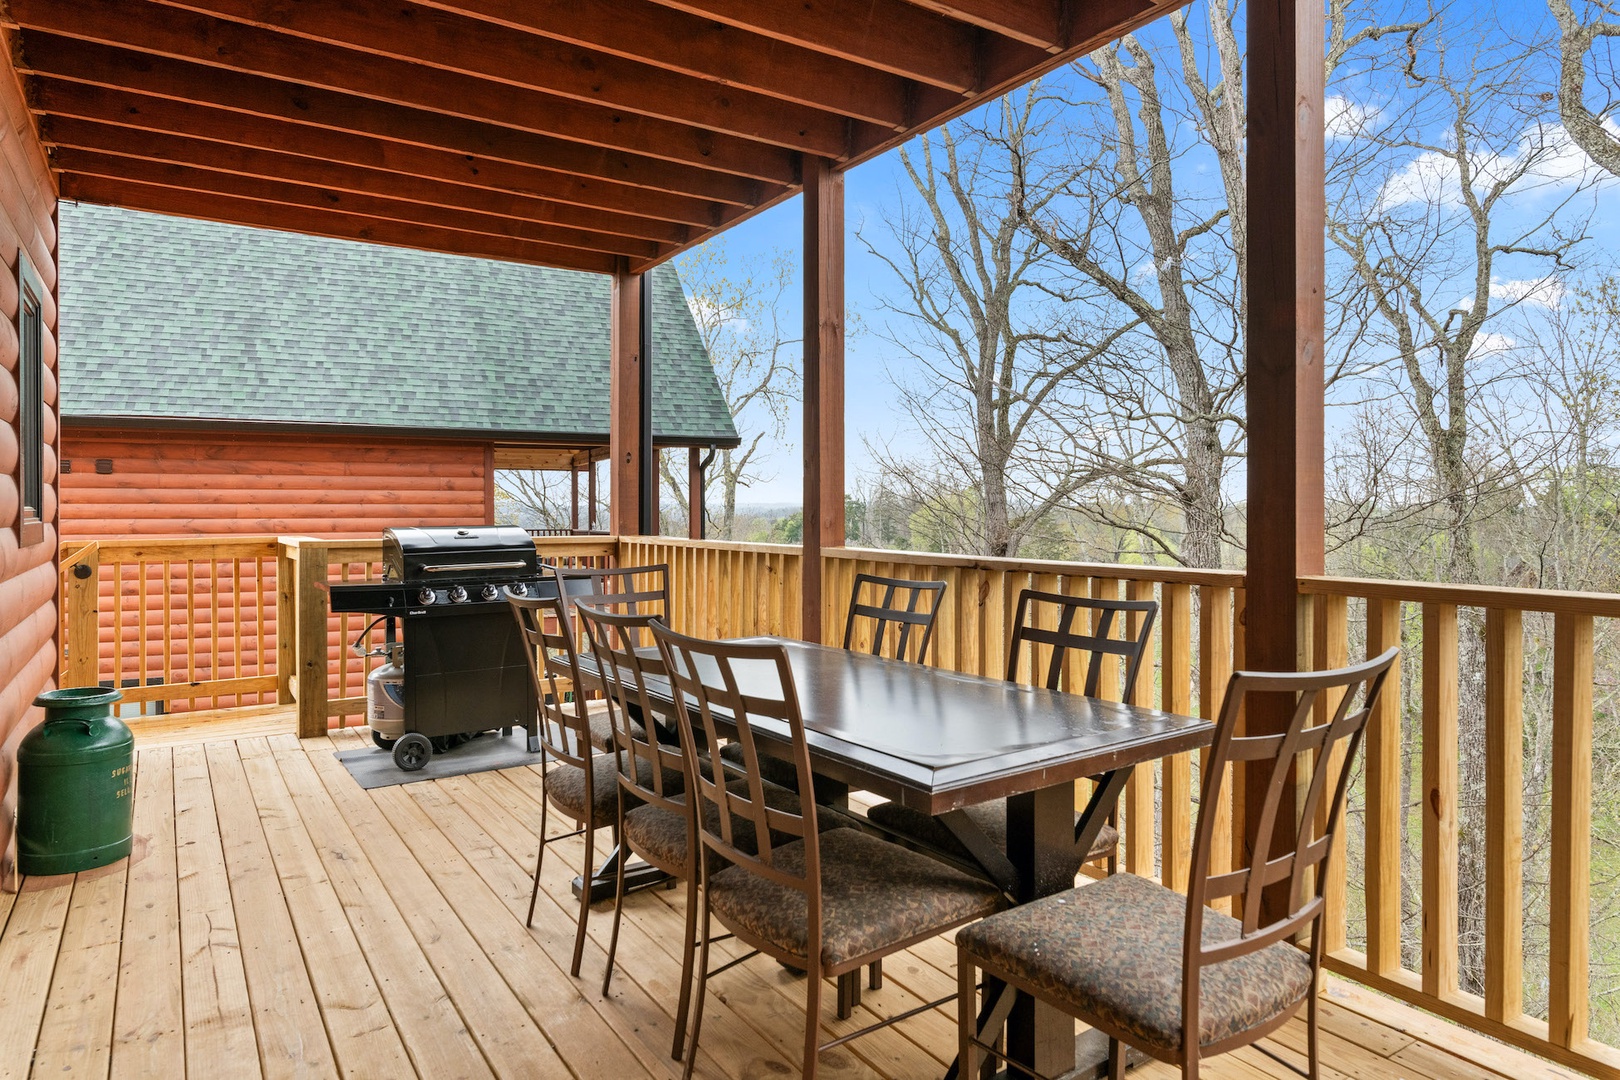 Back deck off of the kitchen with drill and outdoor seating